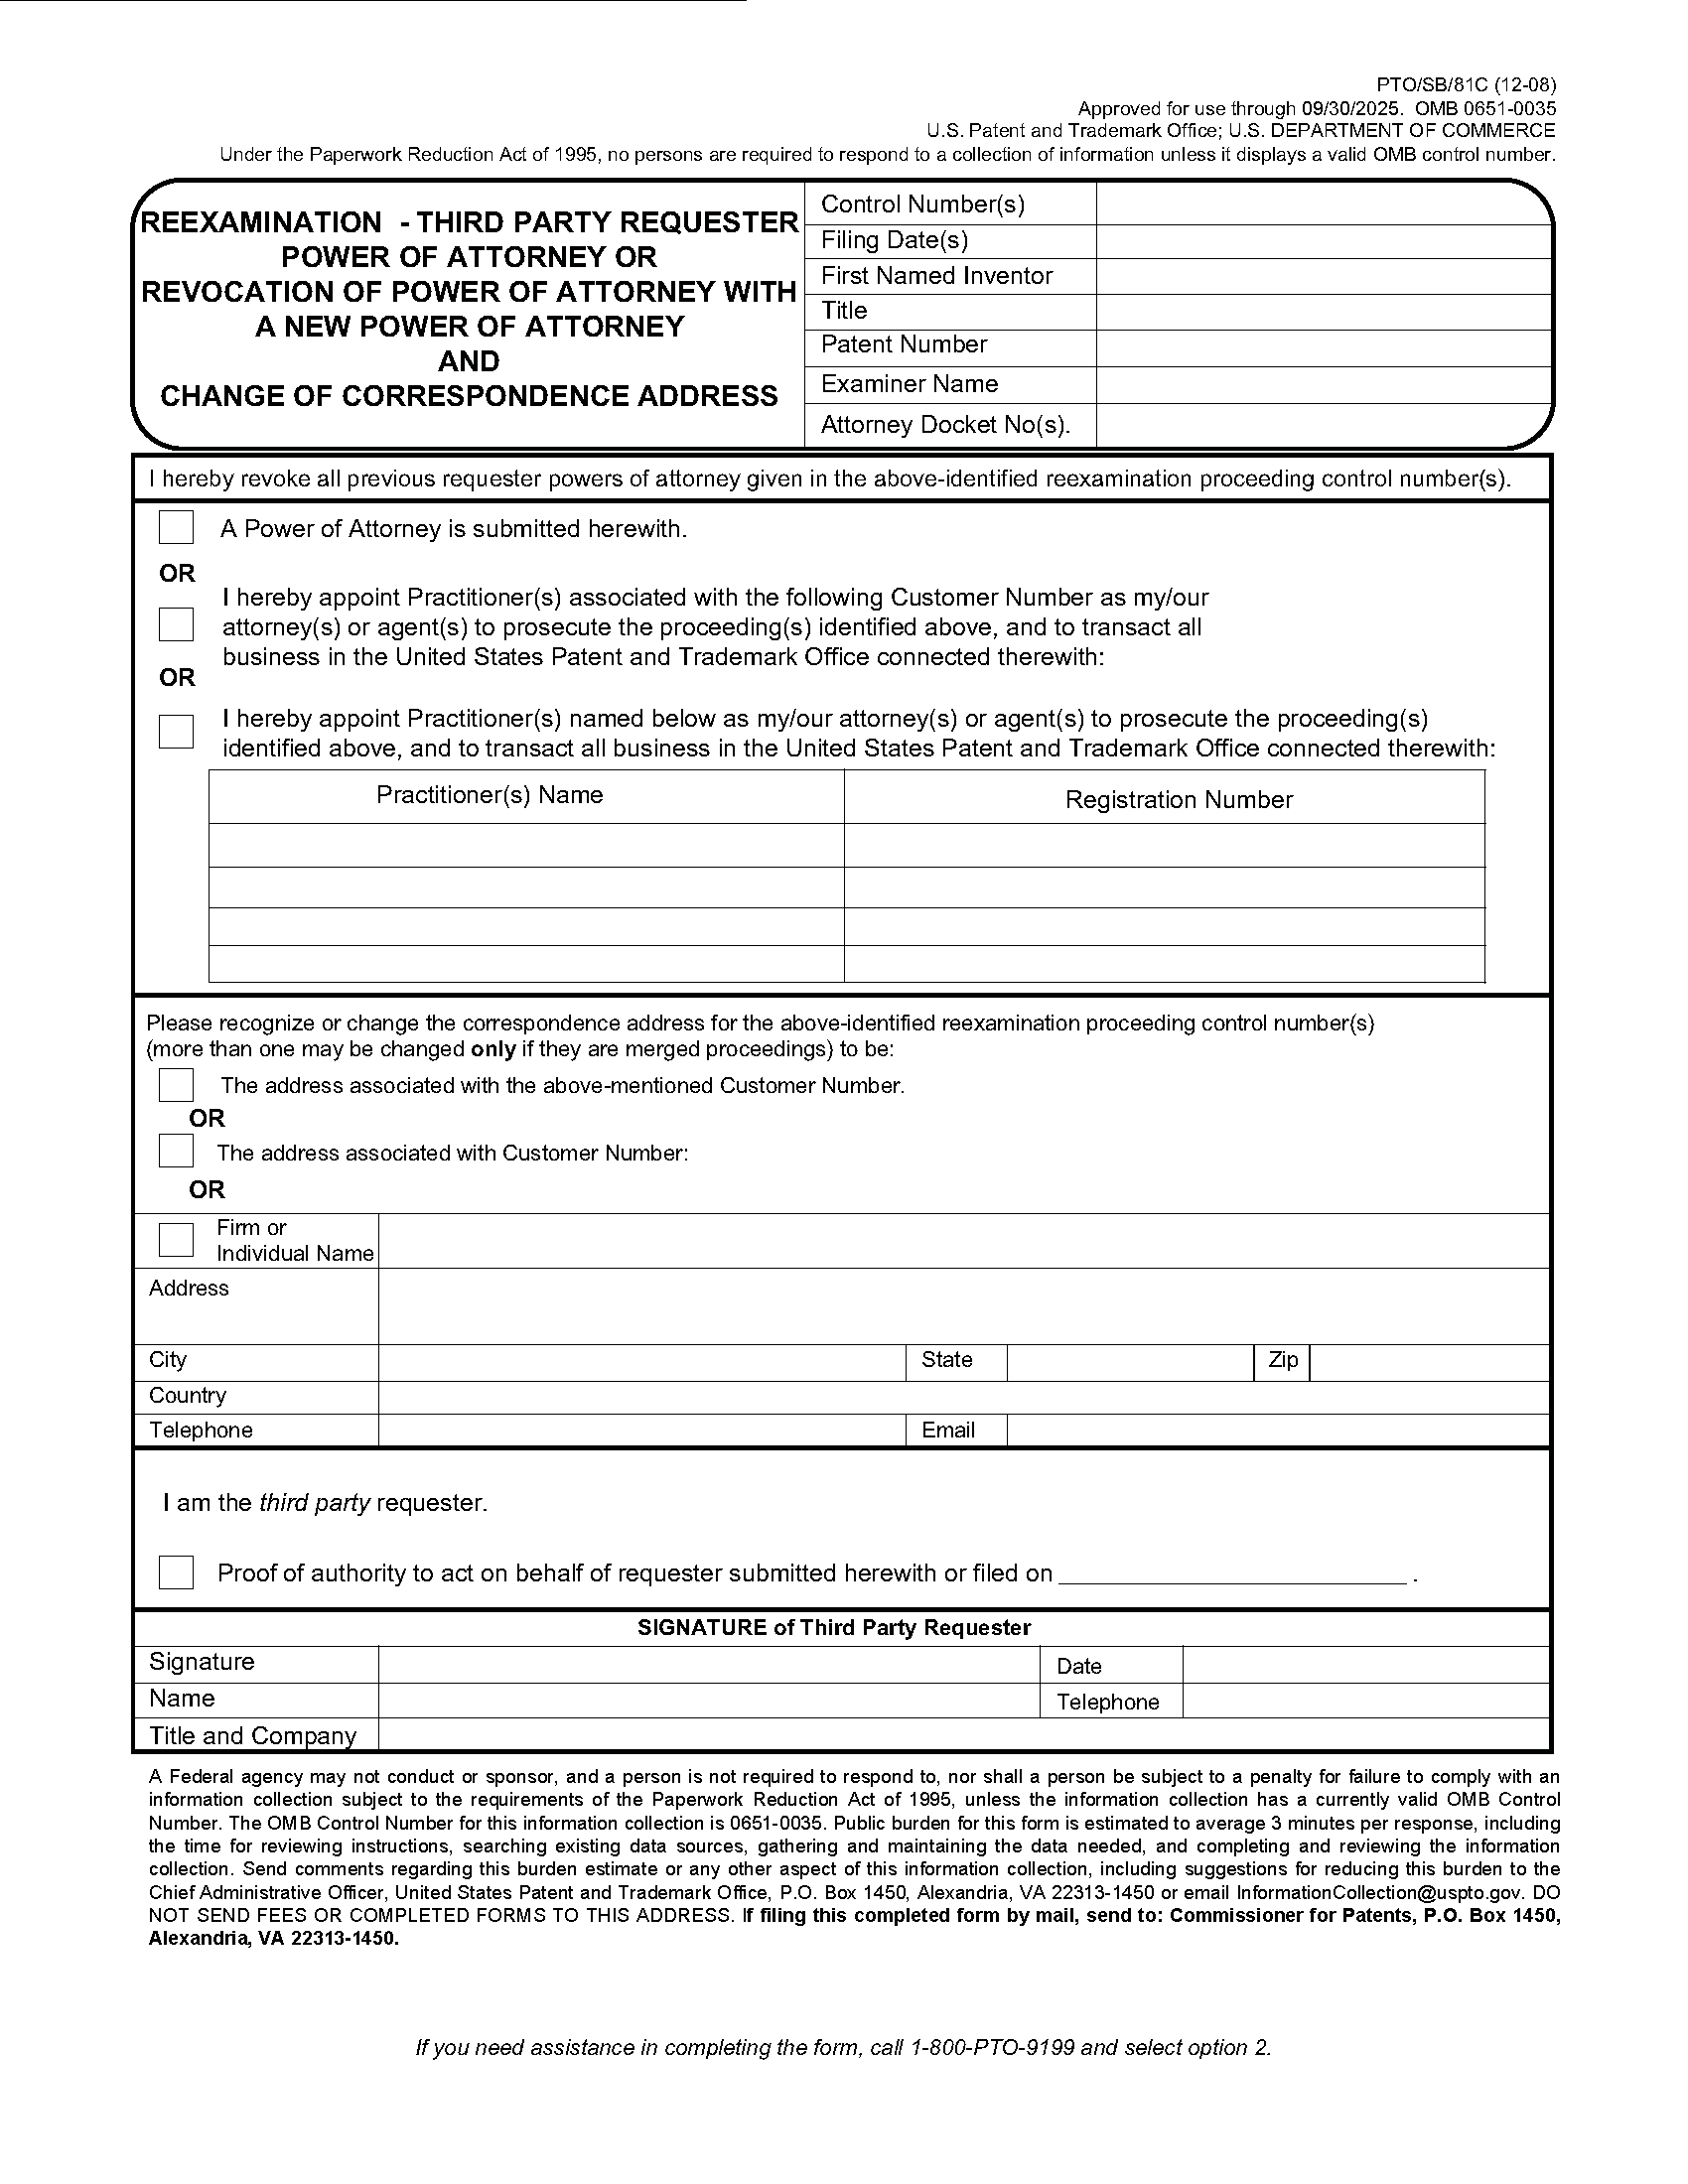 Form PTO/SB/81C Reexamination - Third Party Requester Power of Attorney or Revocation of Power of Attorney With New Power of Attorney and Change of Correspondence Address